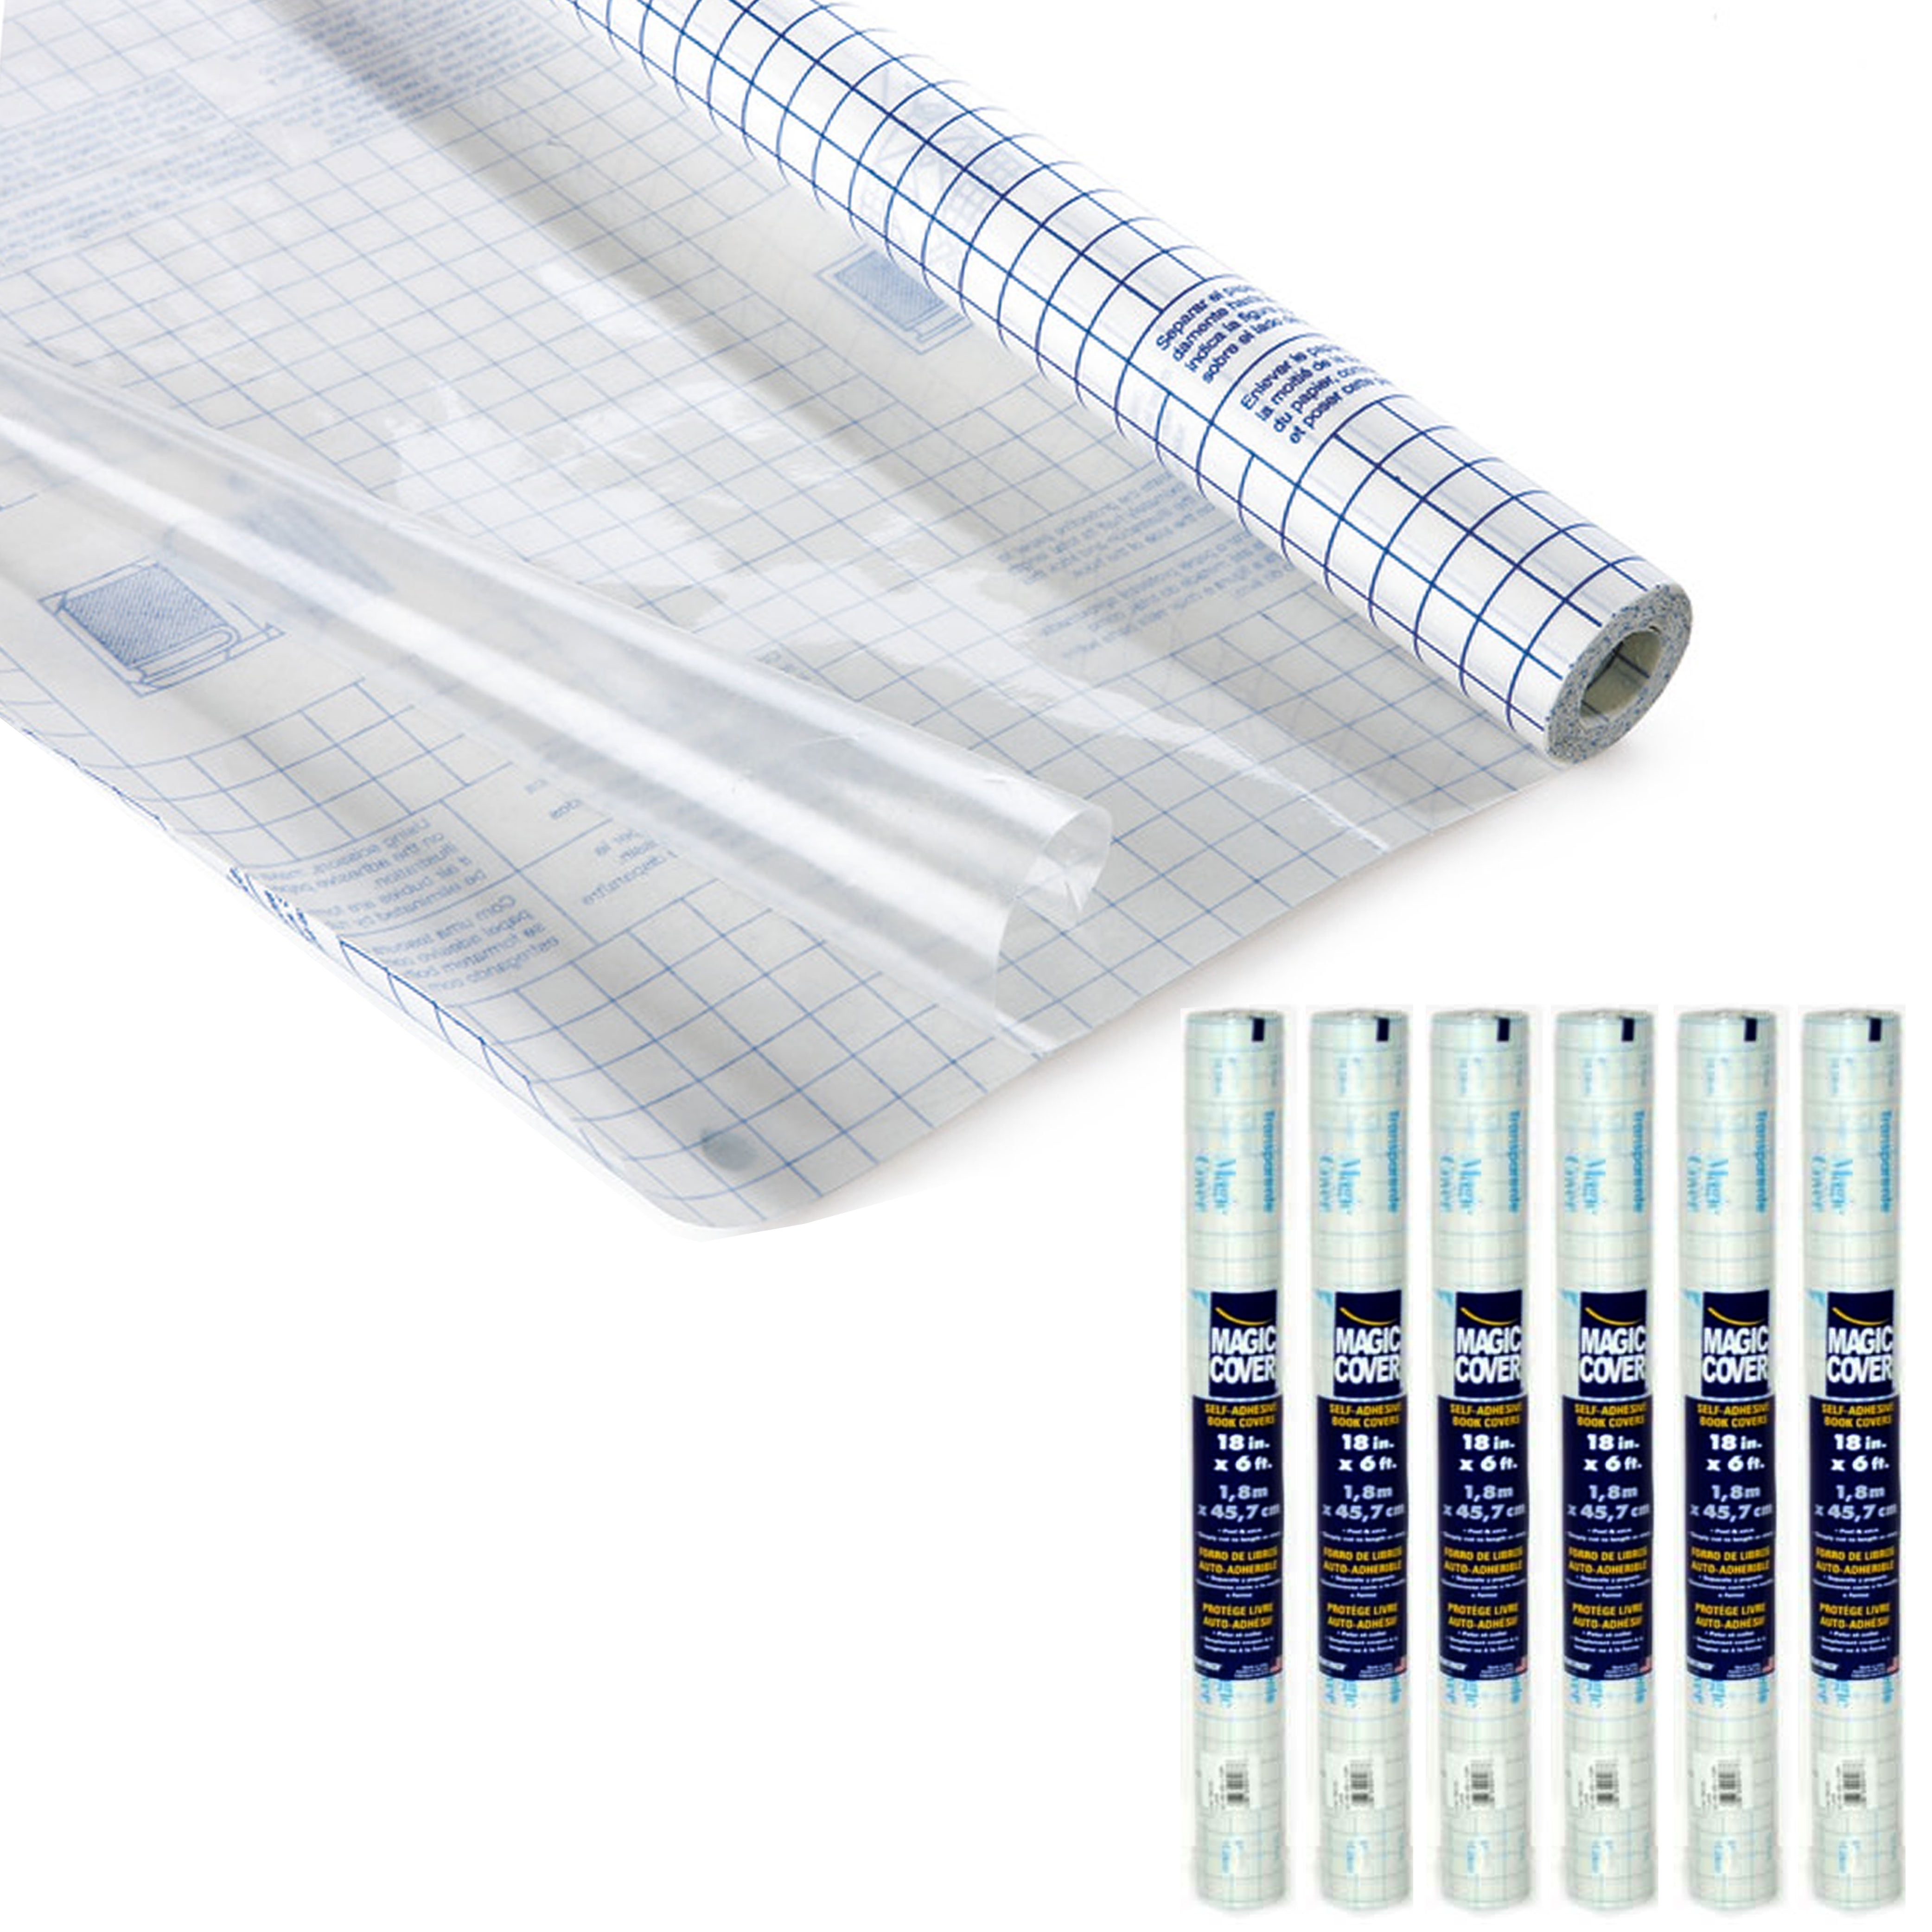 DSIUE Clear Contact Paper for Books, Clear Self Adhesive Book Cover Contact  Paper Roll Protect Books and Documents, 11.8 X 10 ft